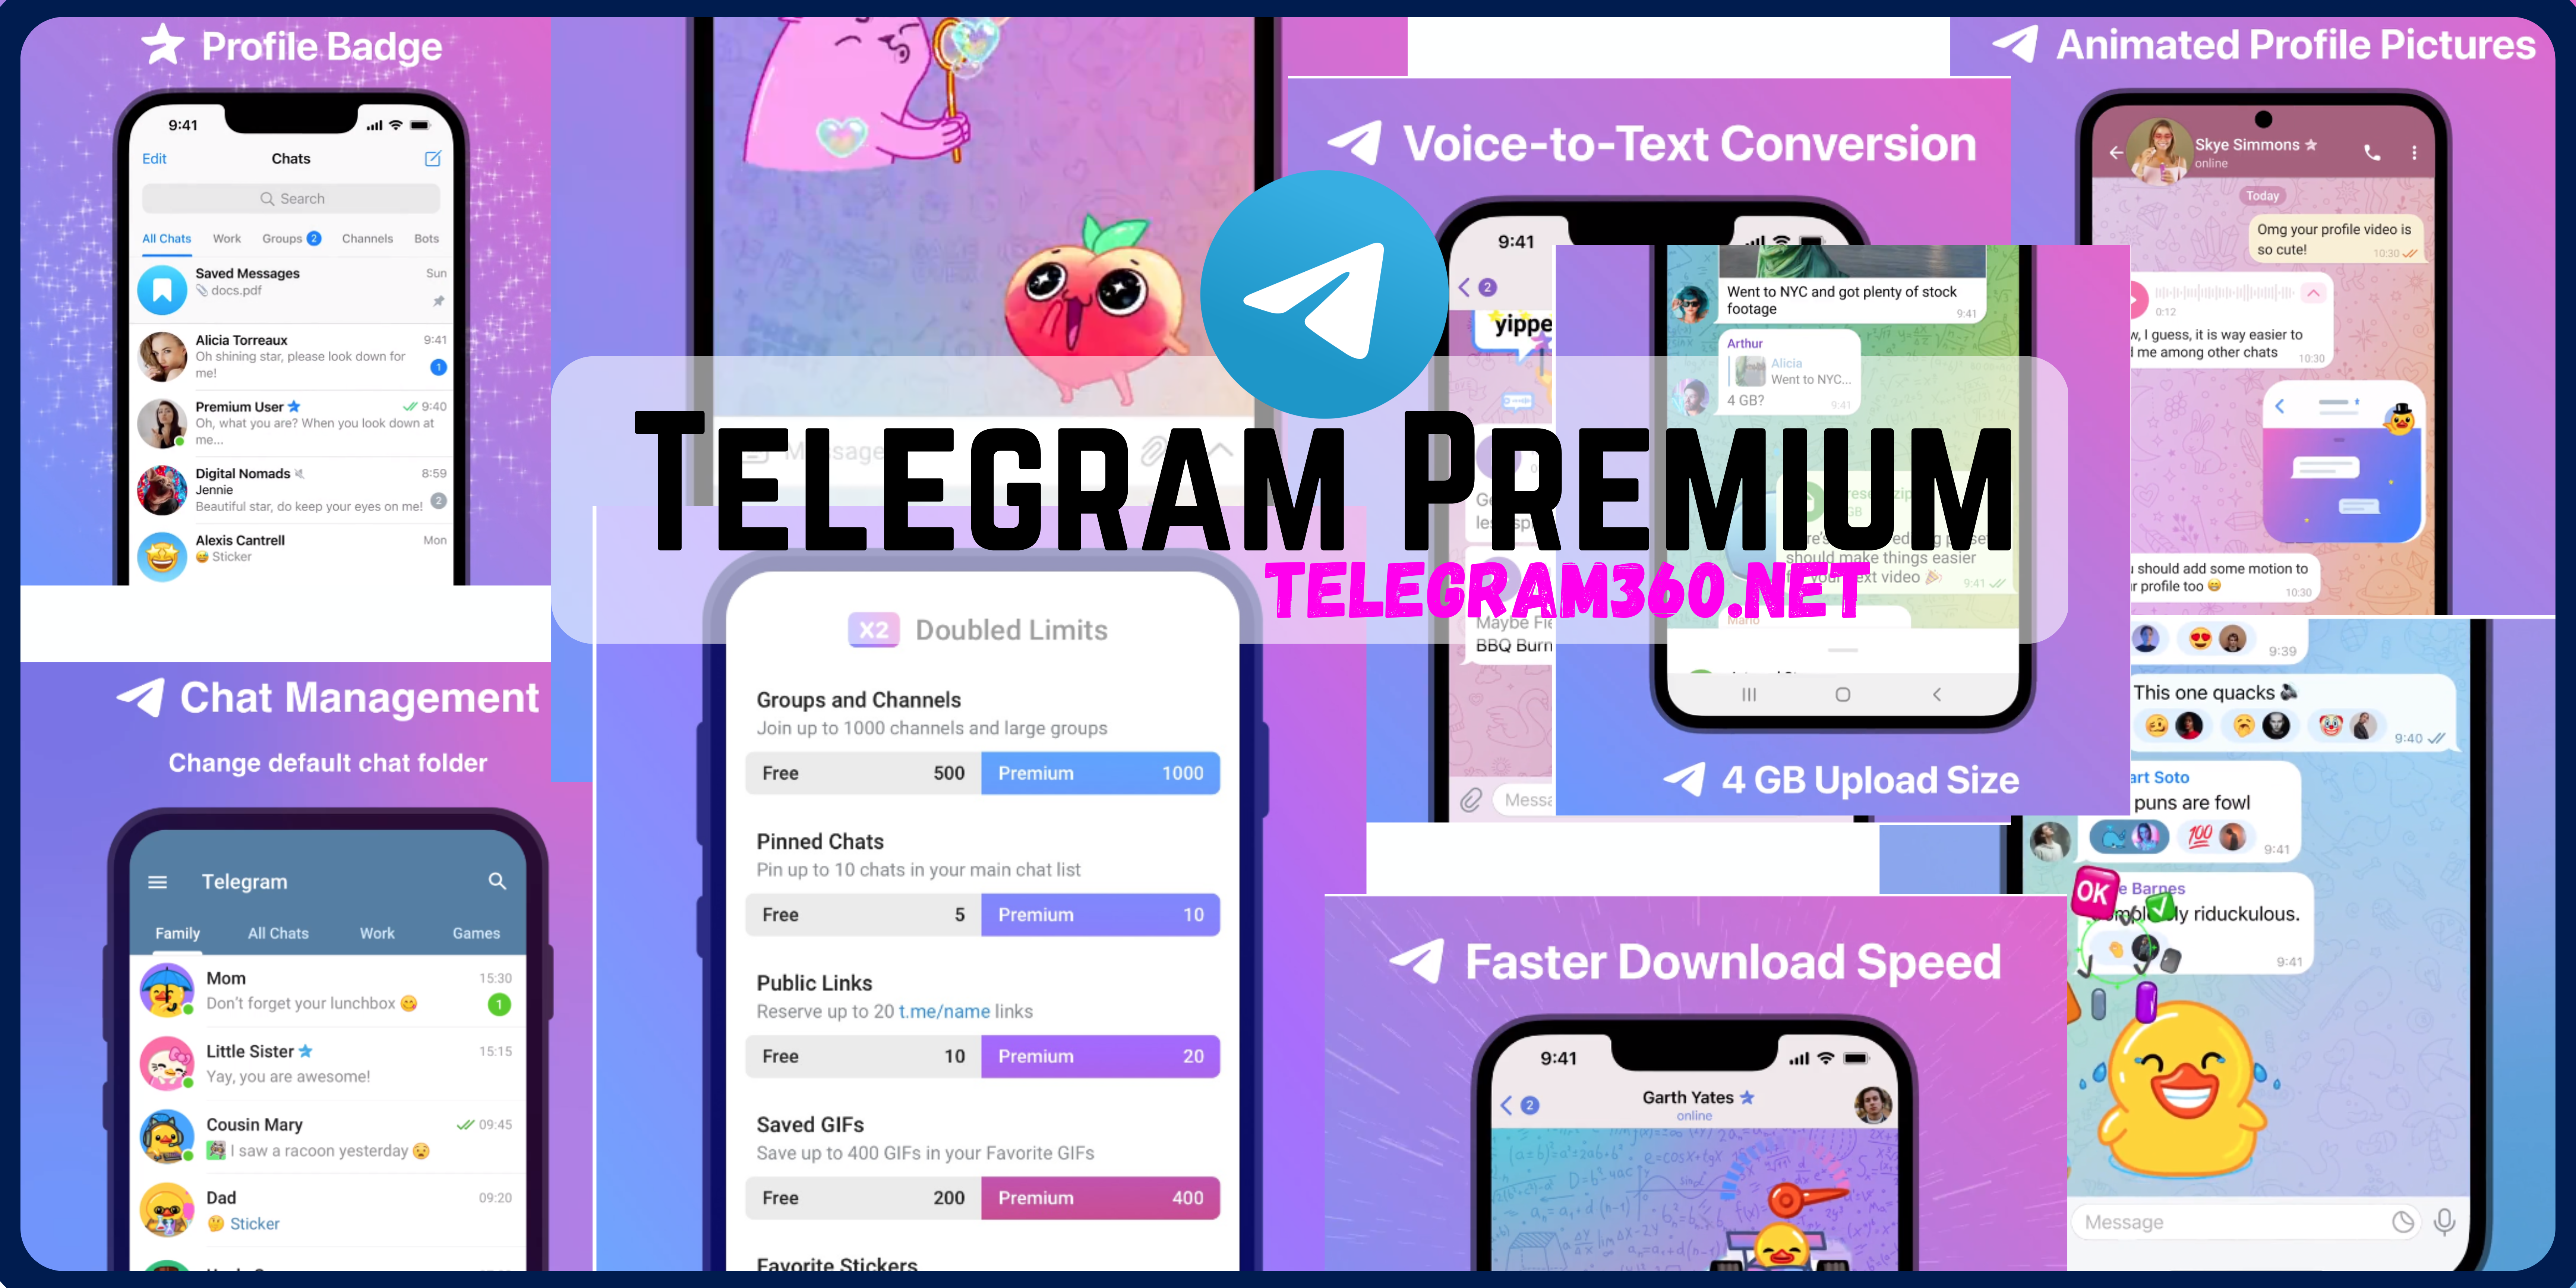 Telegram Premium: All The Best Things You Need To Know